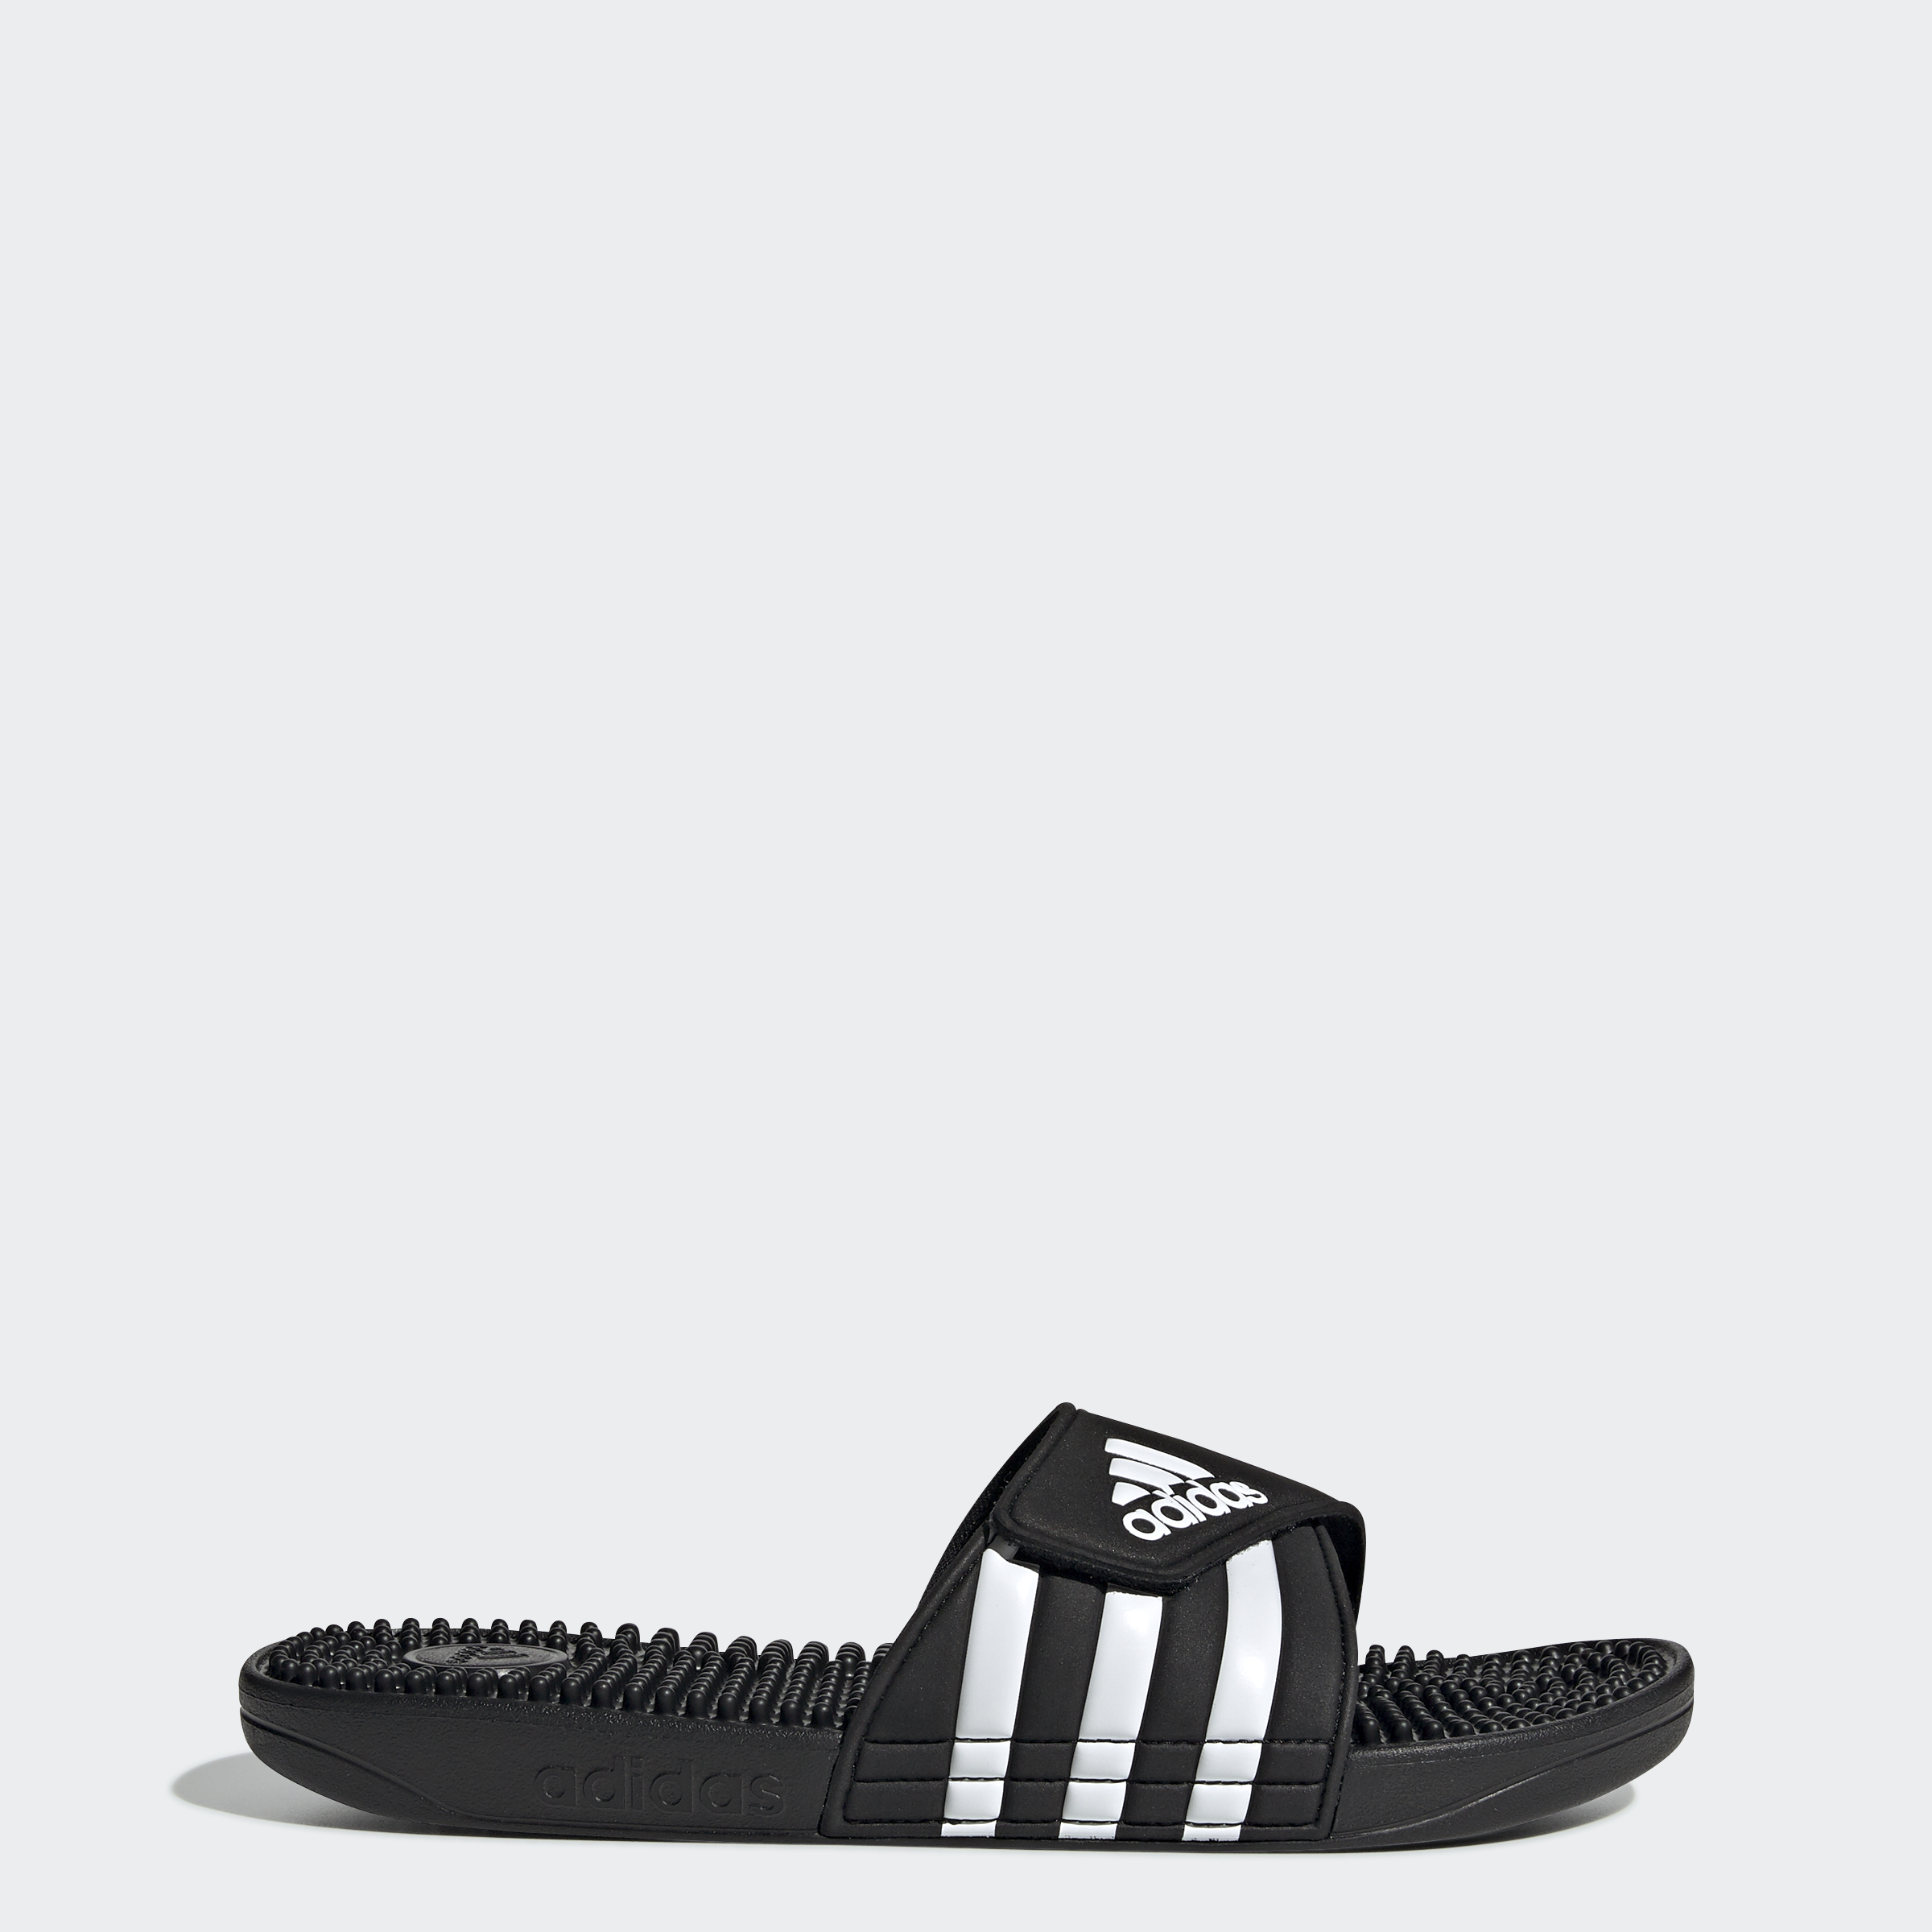 Perseguir Acelerar Significativo adidas Ebay Stacking Codes for Select Items:35% off + 20% off: adidas Men's  Adissage Slide Sandals $12.48, More + free shipping